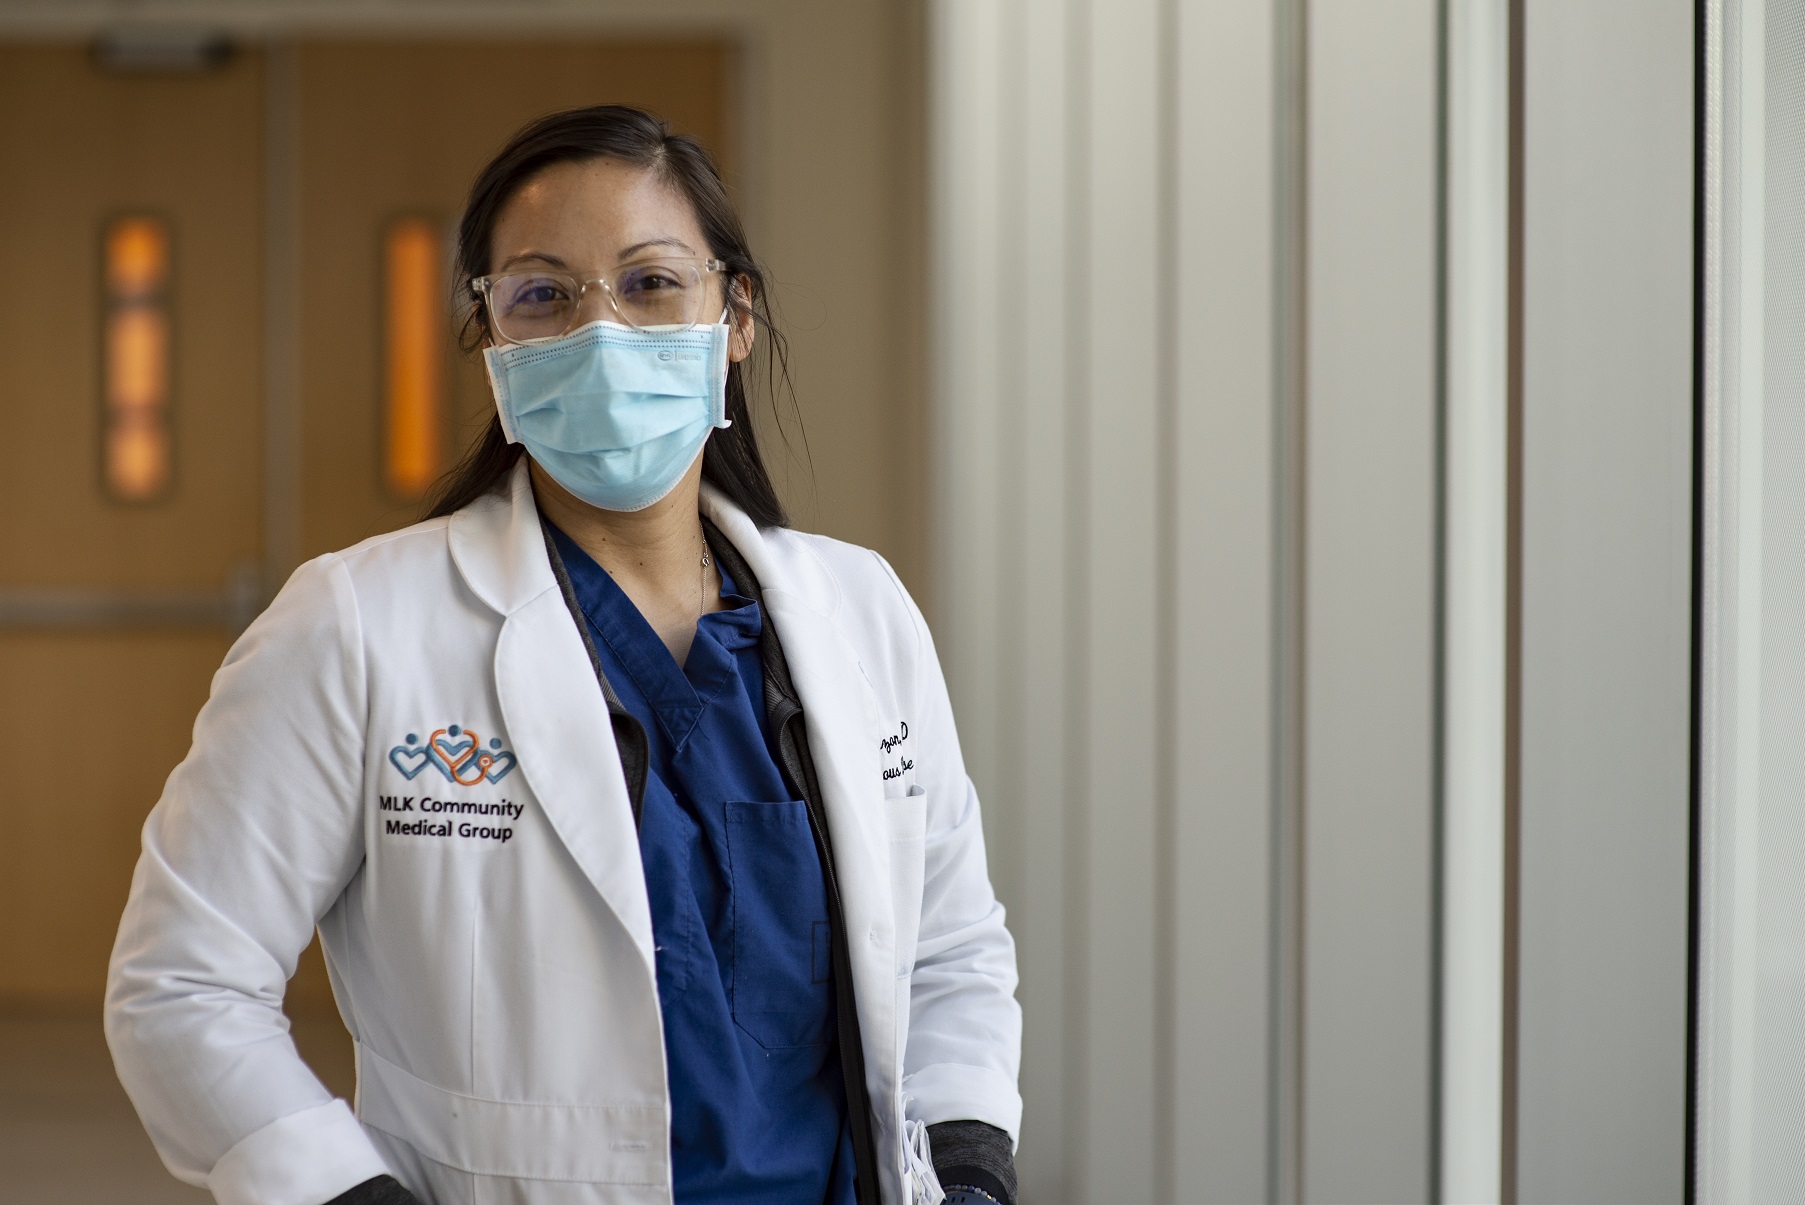 Dr. Erin Dizon, a young Asian female doctor in a white coat